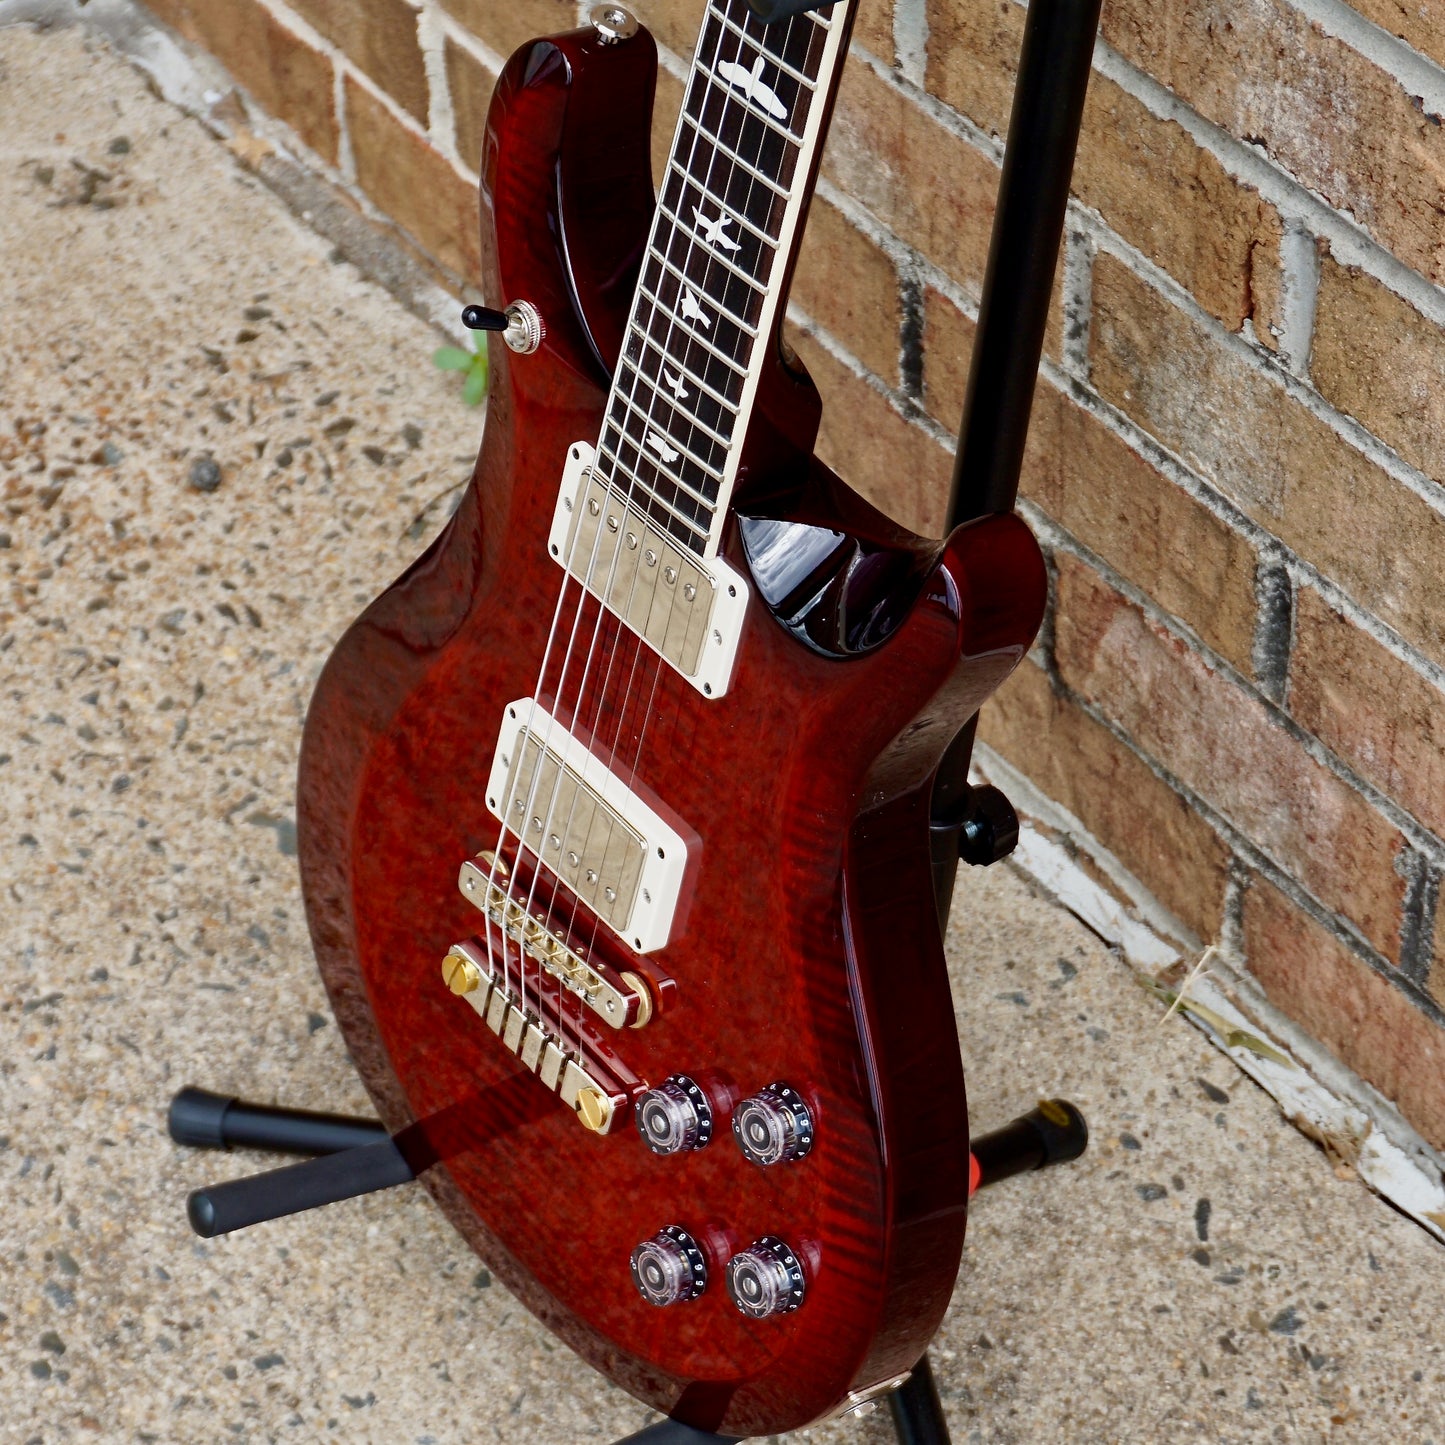 PRS S2 McCarty 594 Fire Red Burst